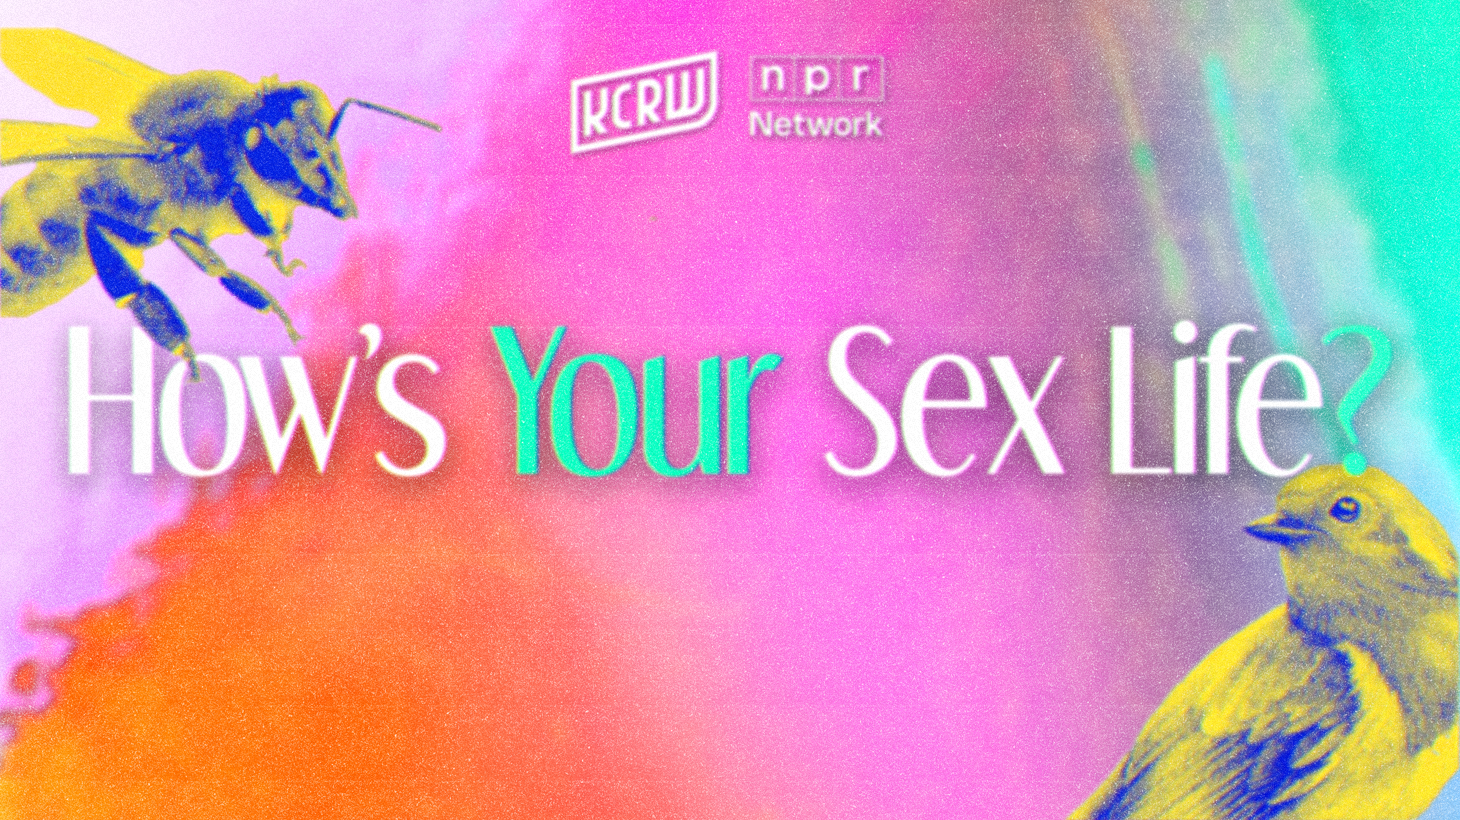 While we’re off this week, you can catch up on past episodes about kink, self-love, and orgasms right here in the podcast feed. And send your sex and dating questions to sexlife at KCRW dot org.